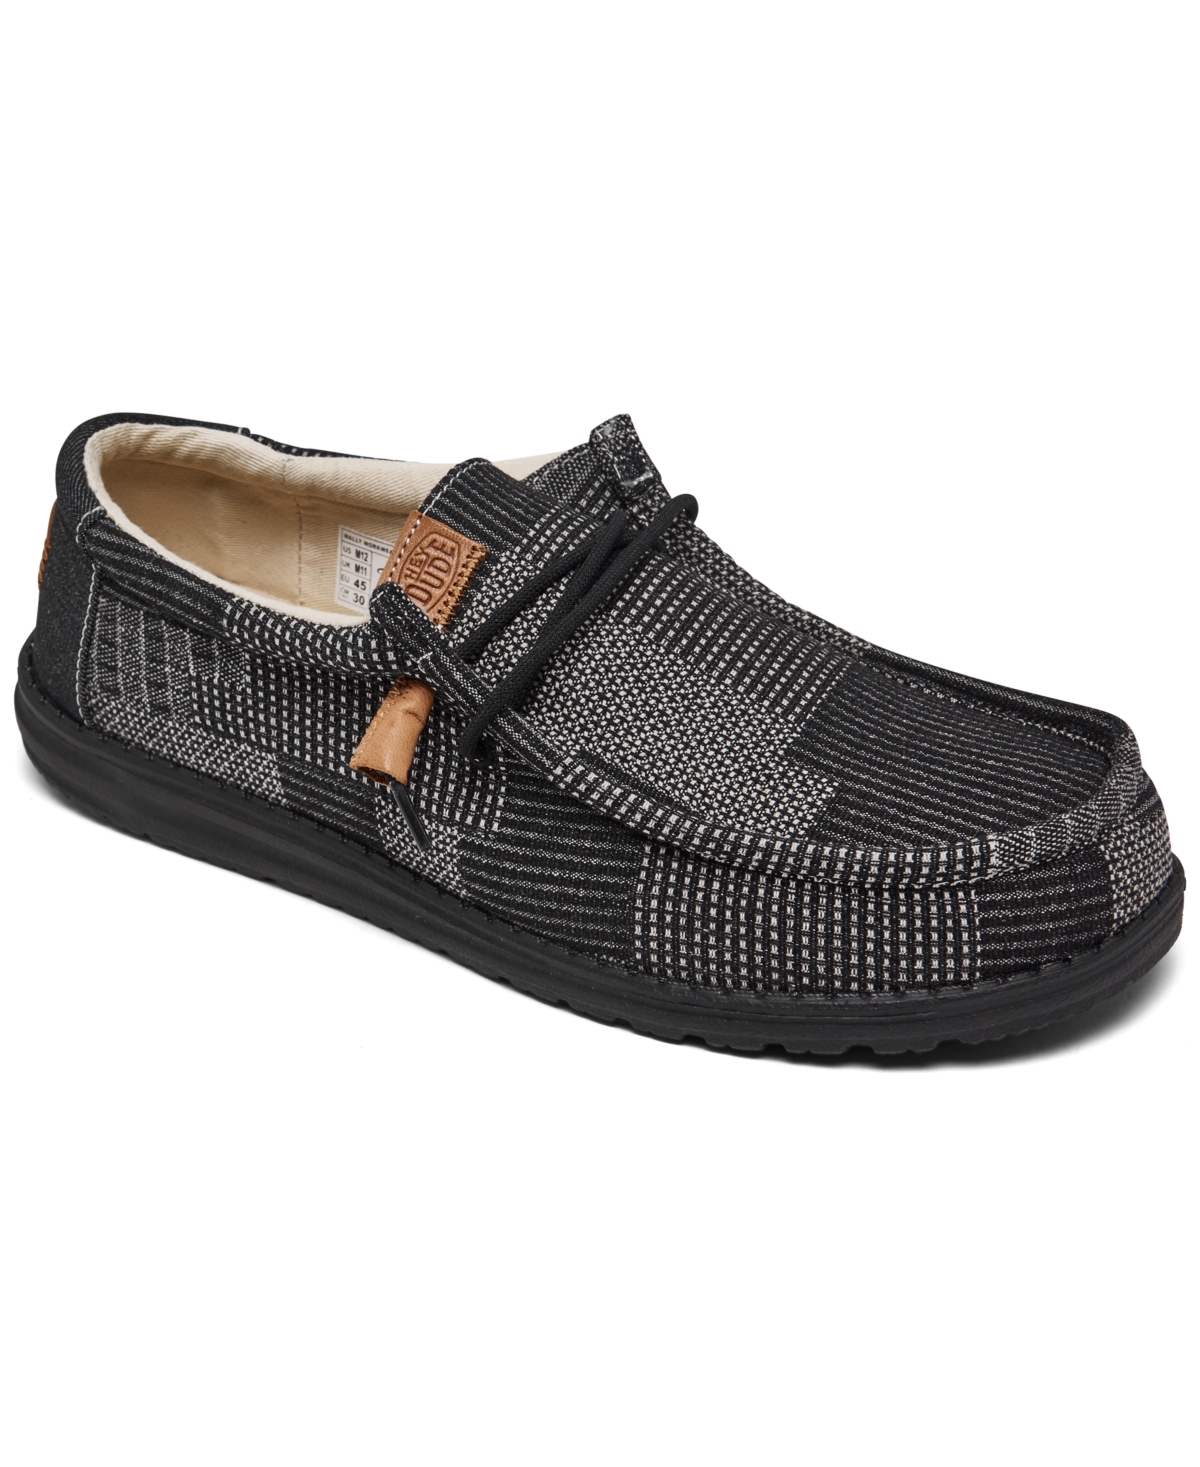 Shop Hey Dude Men's Wally Work Wear Casual Moccasin Sneakers From Finish Line In Black Patchwork